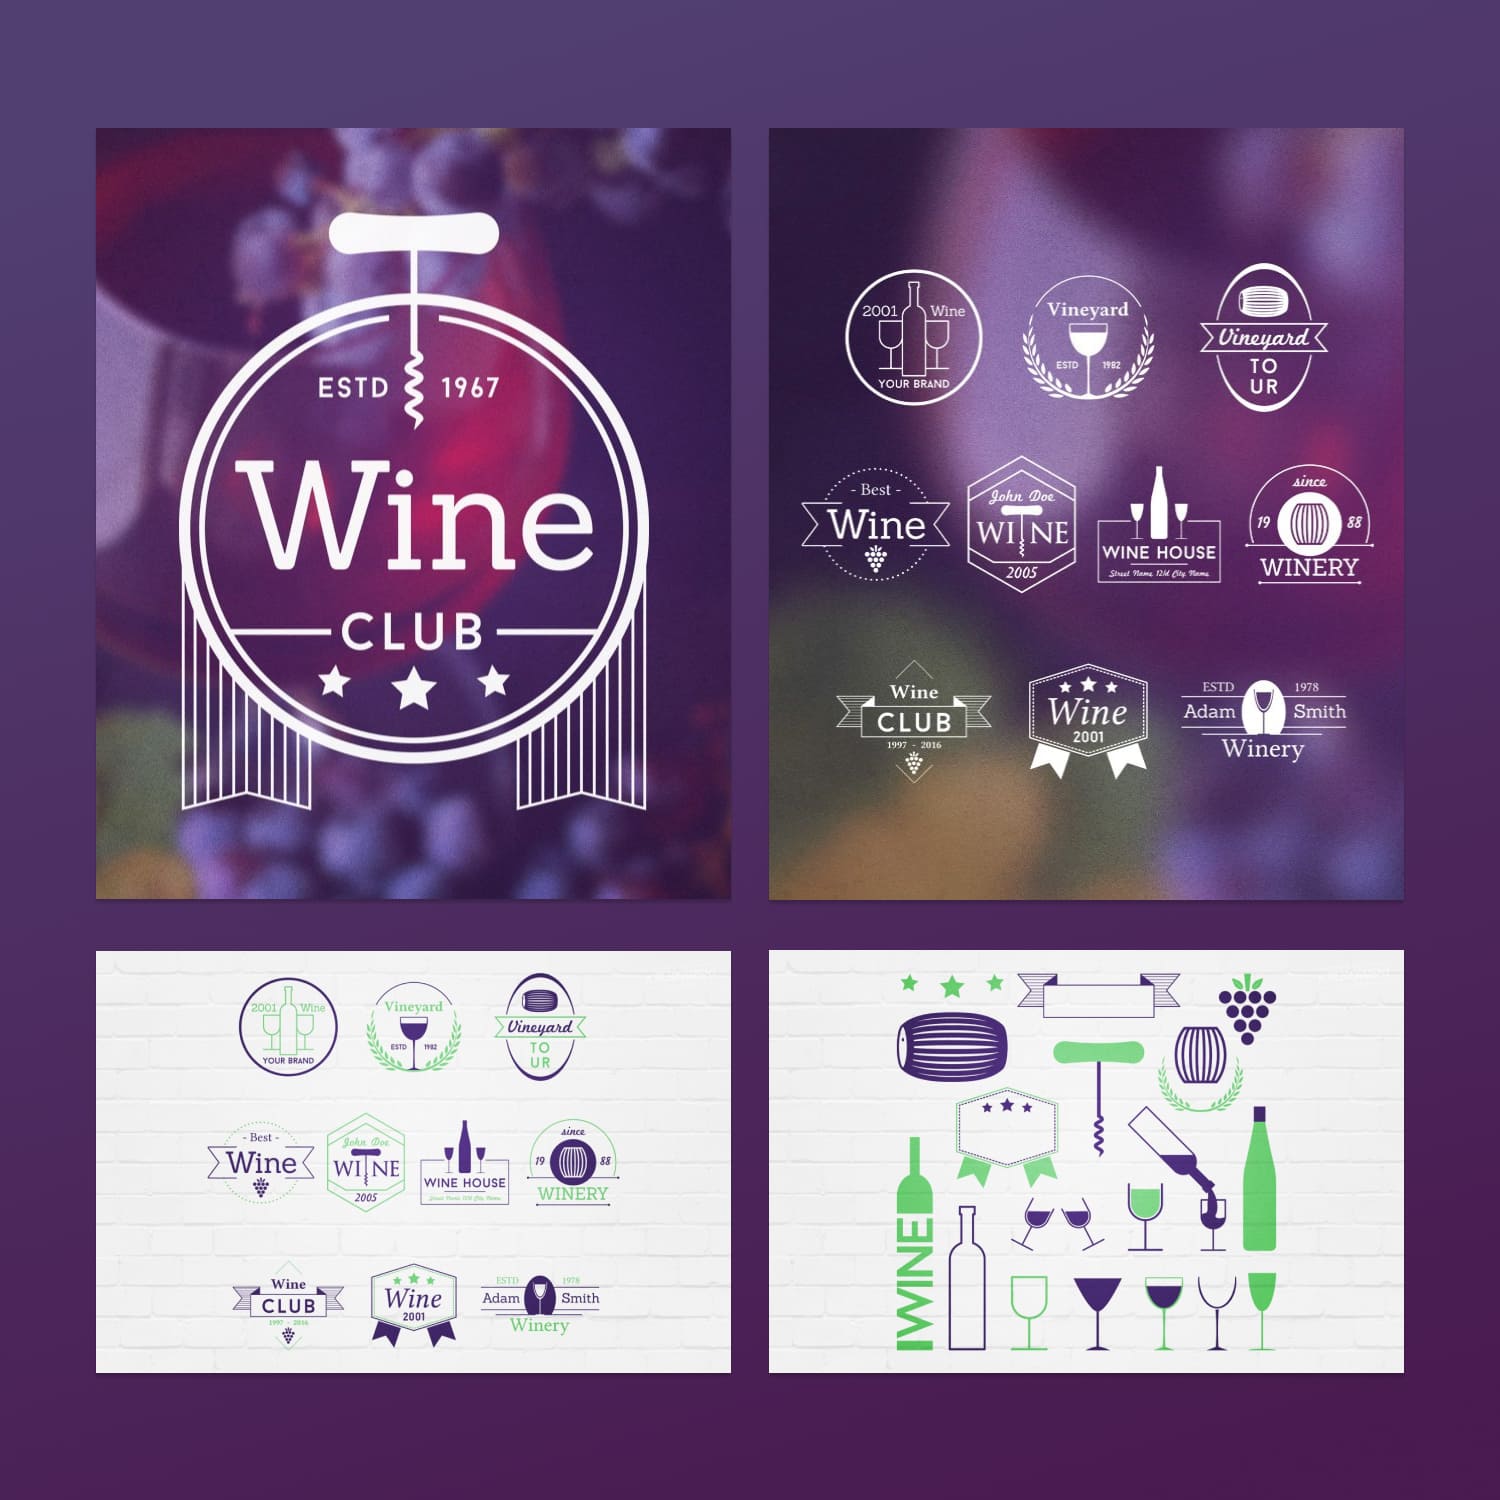 Wine Vineyard Badges are premade insignia style logos.